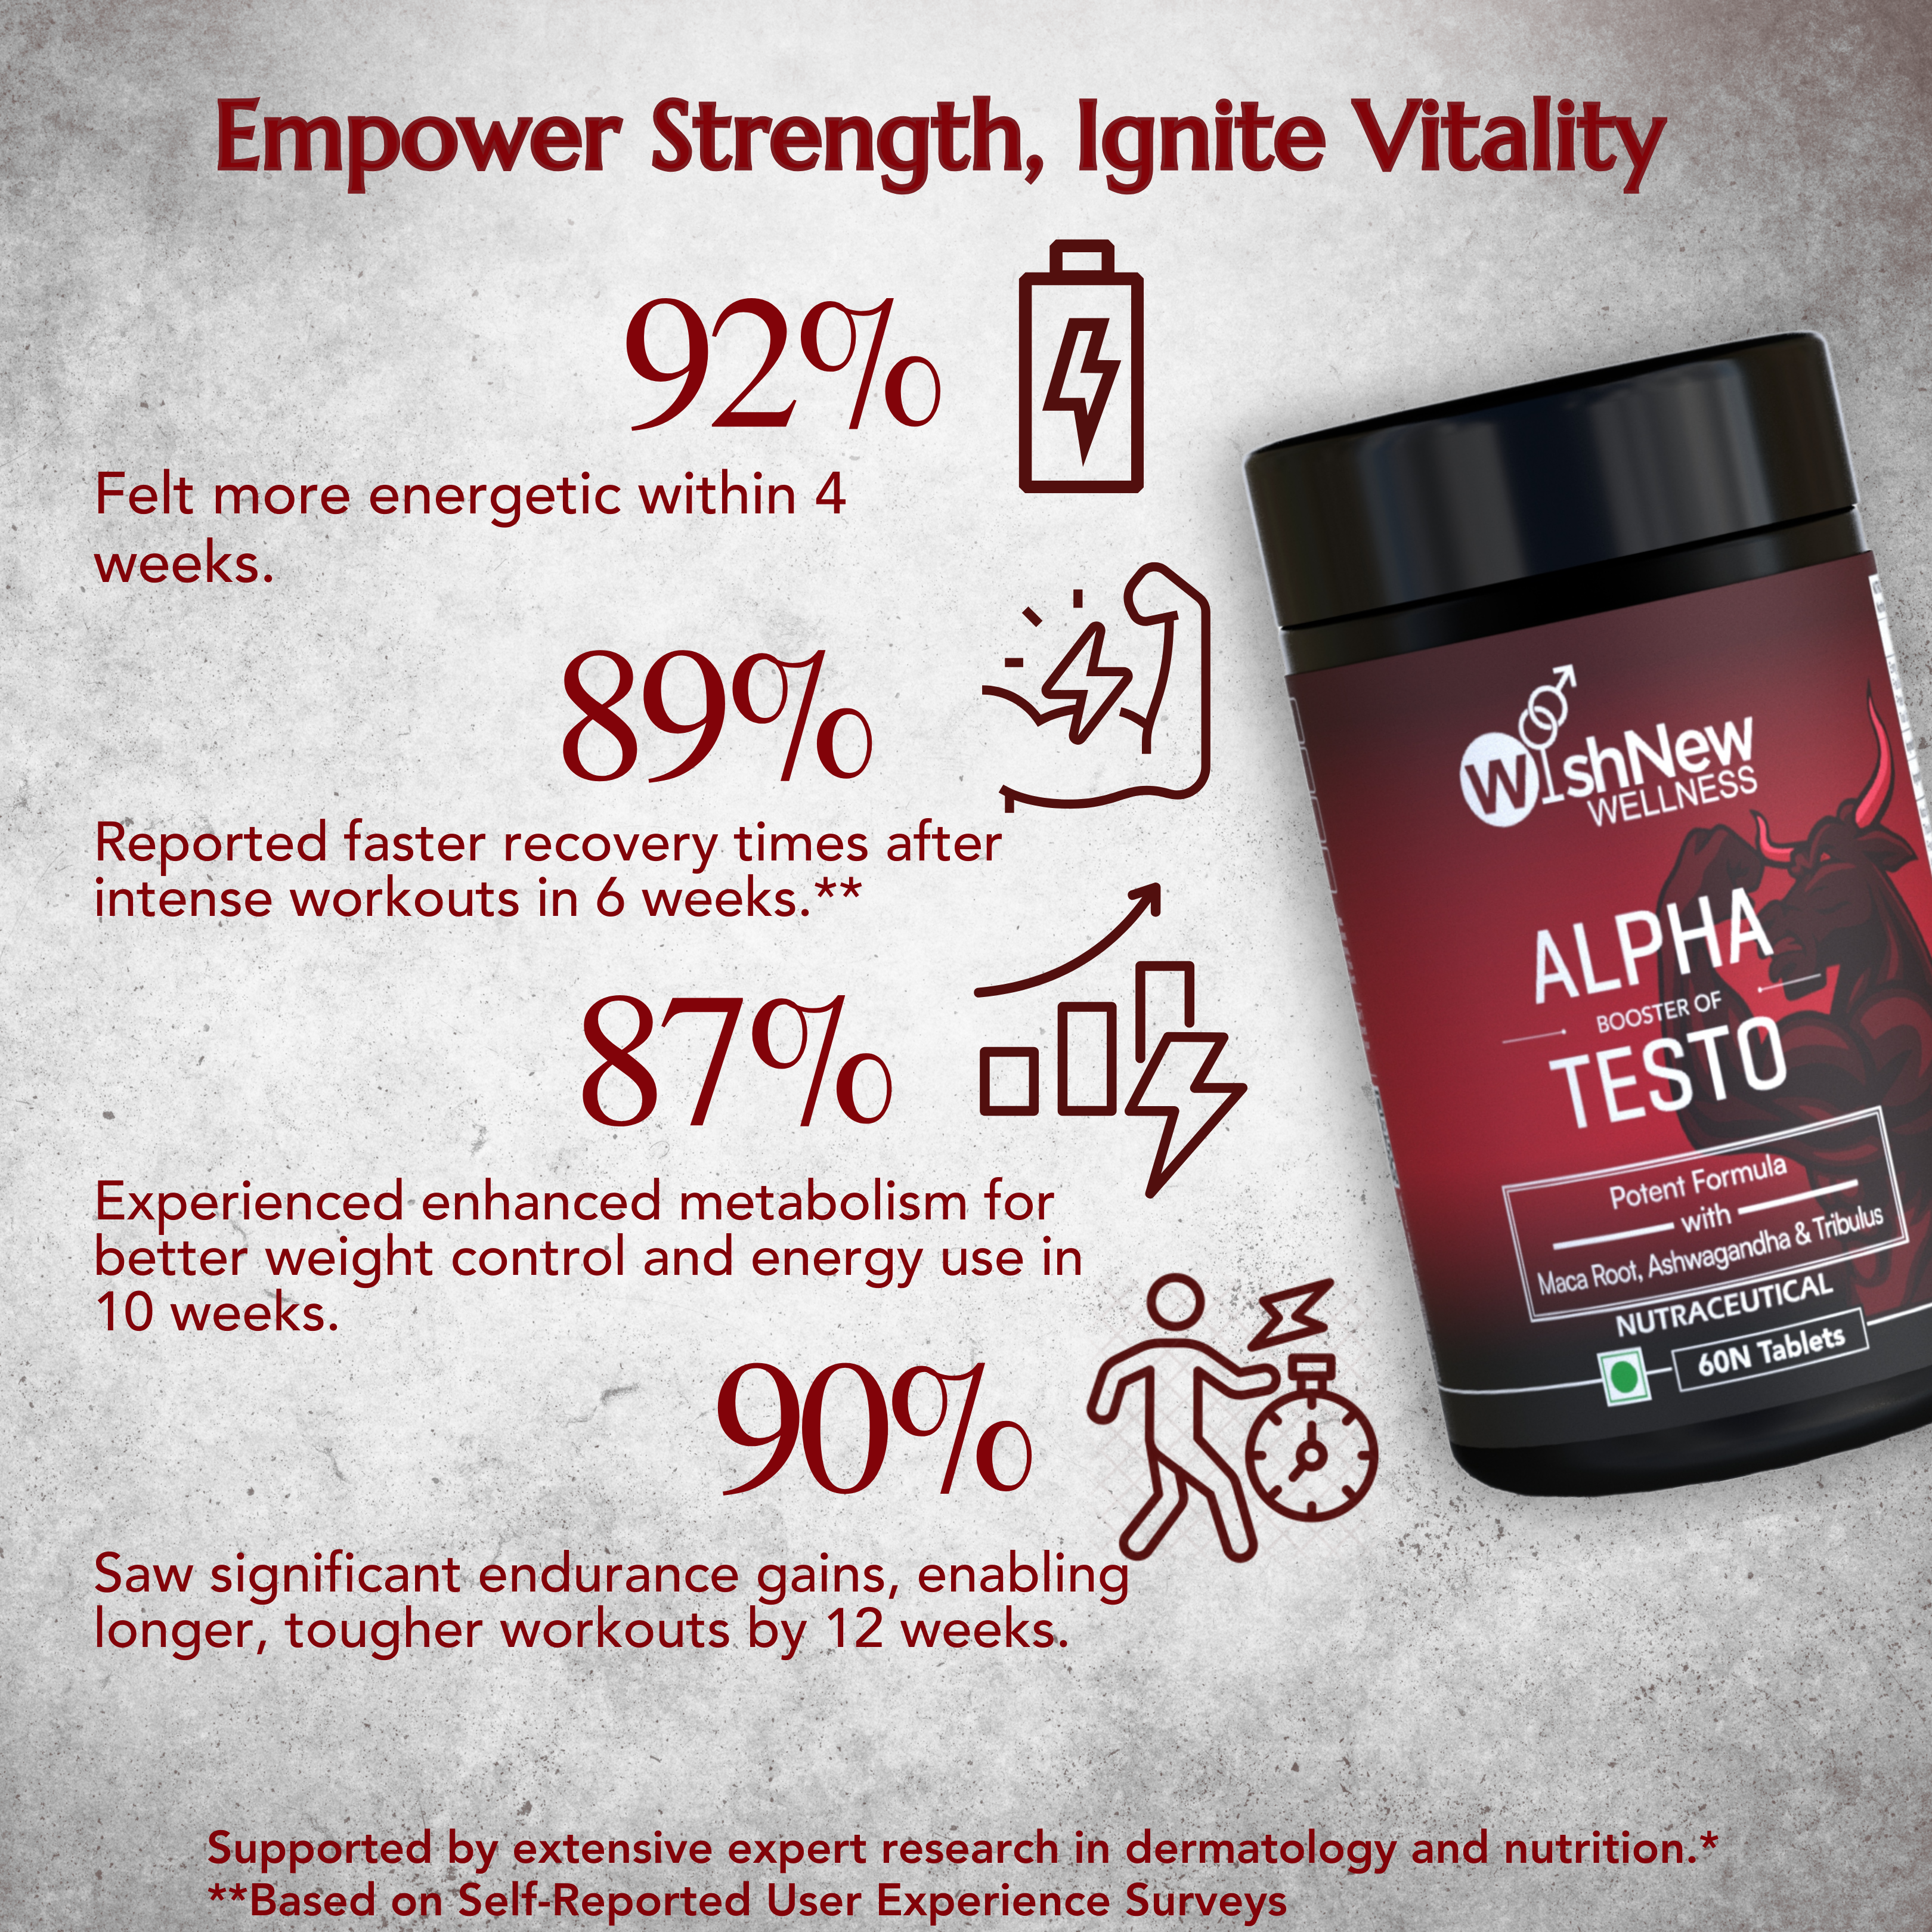 Alpha Booster Of Testo